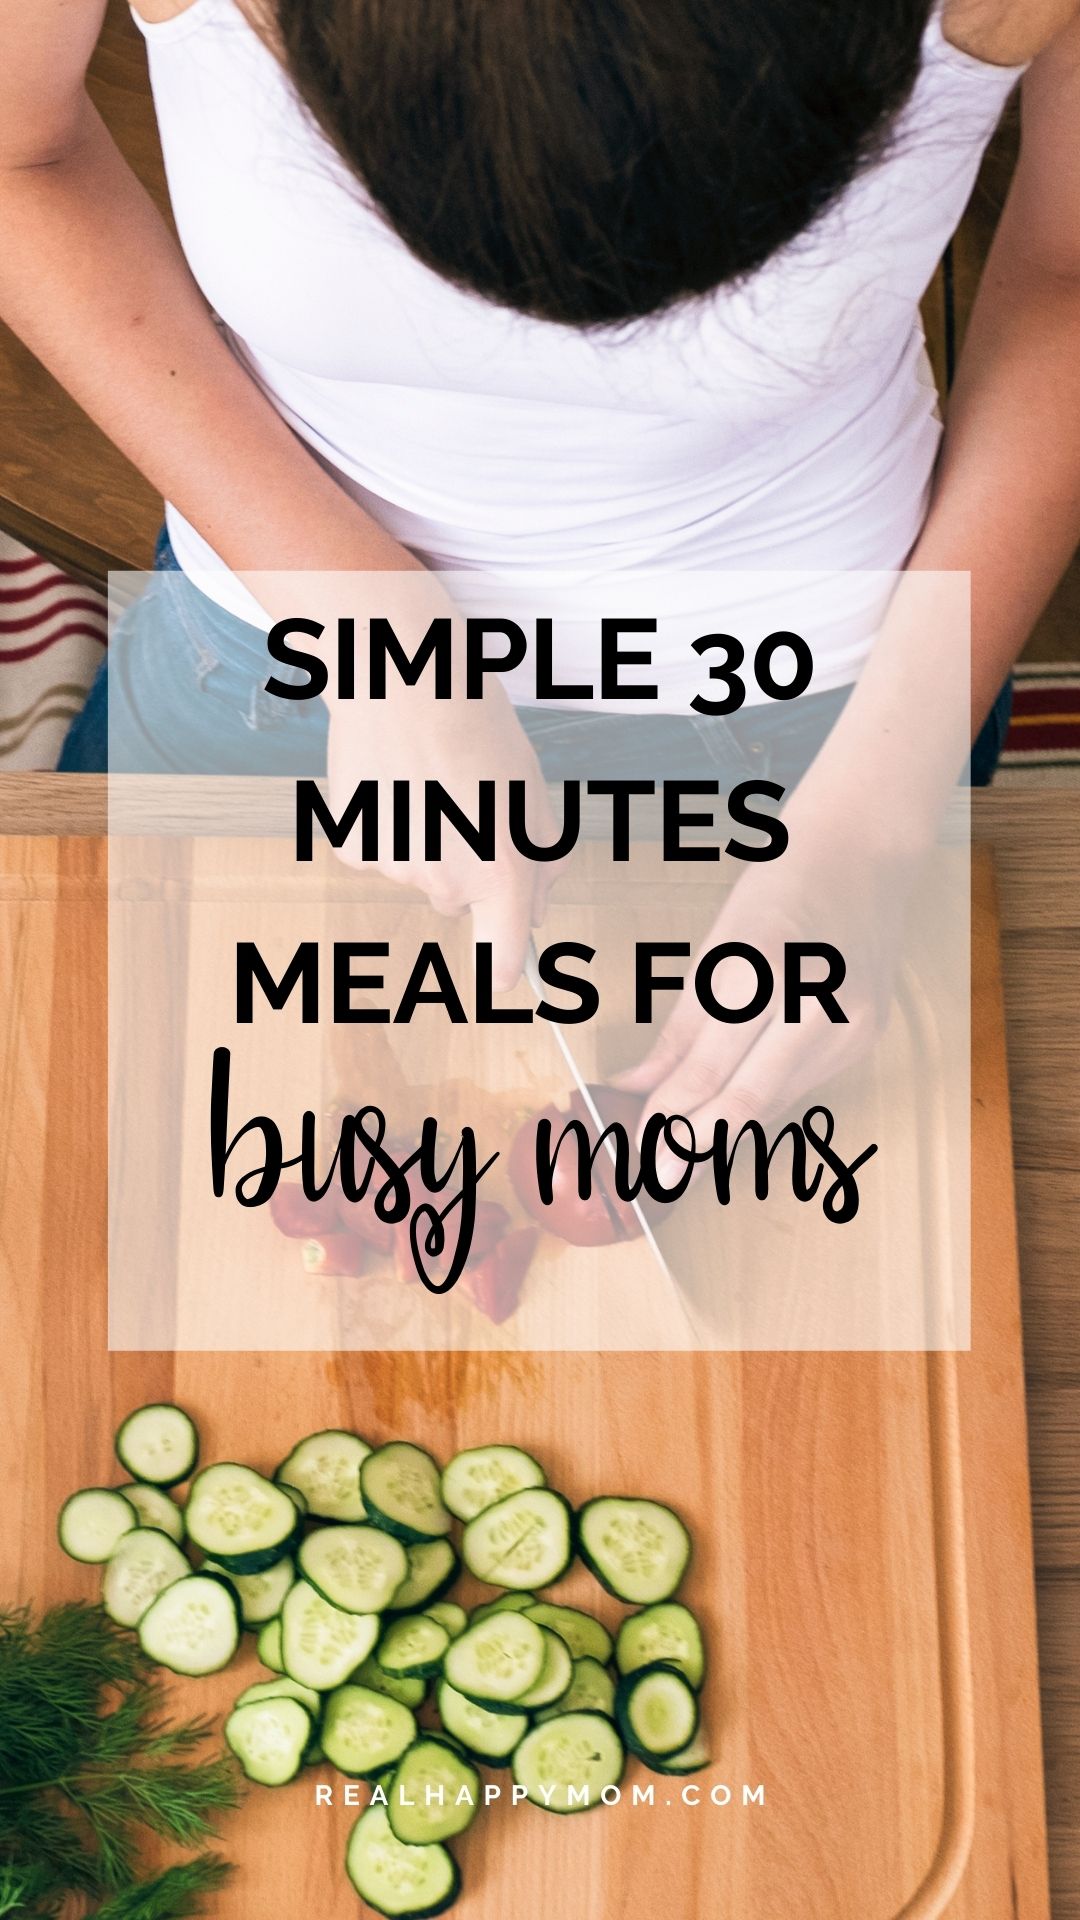 Simple 30 Minute Meals for Busy Moms